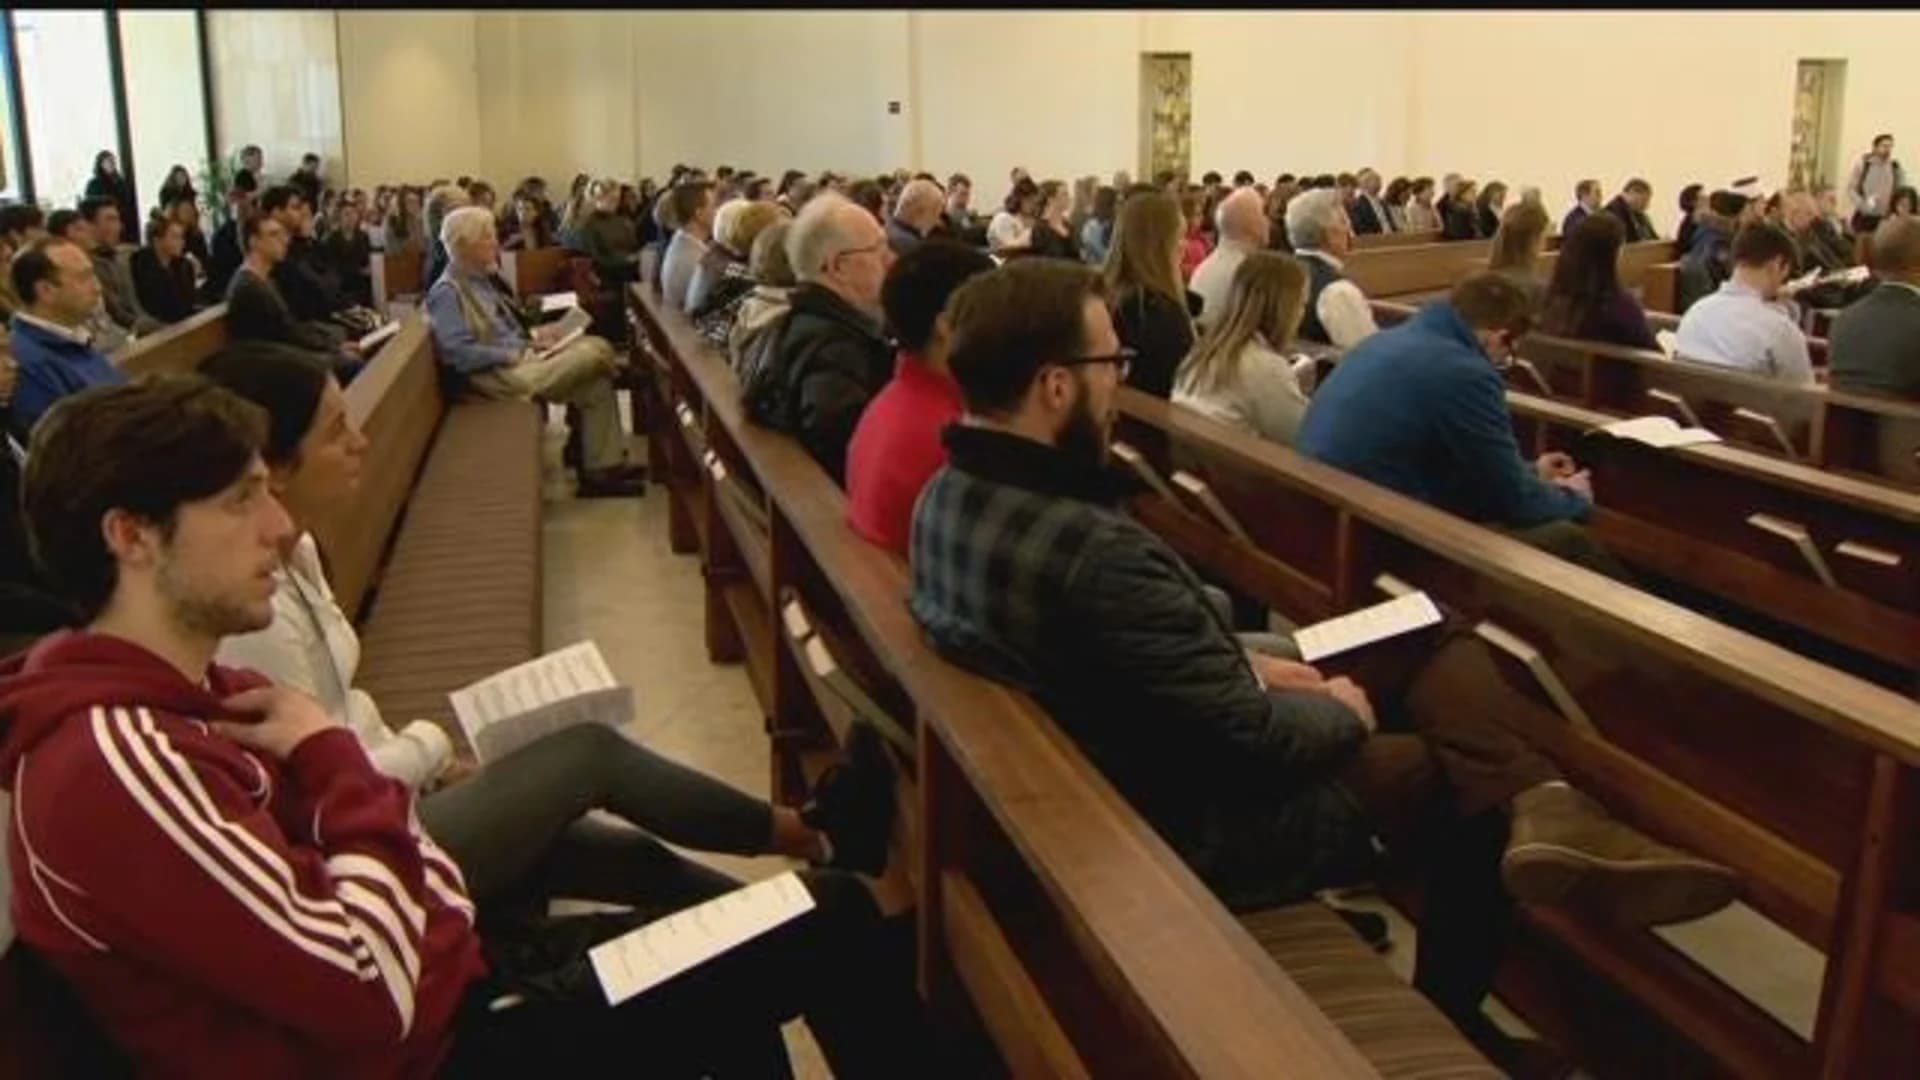 Sacred Heart University holds prayer service for New Zealand mosque shooting victims